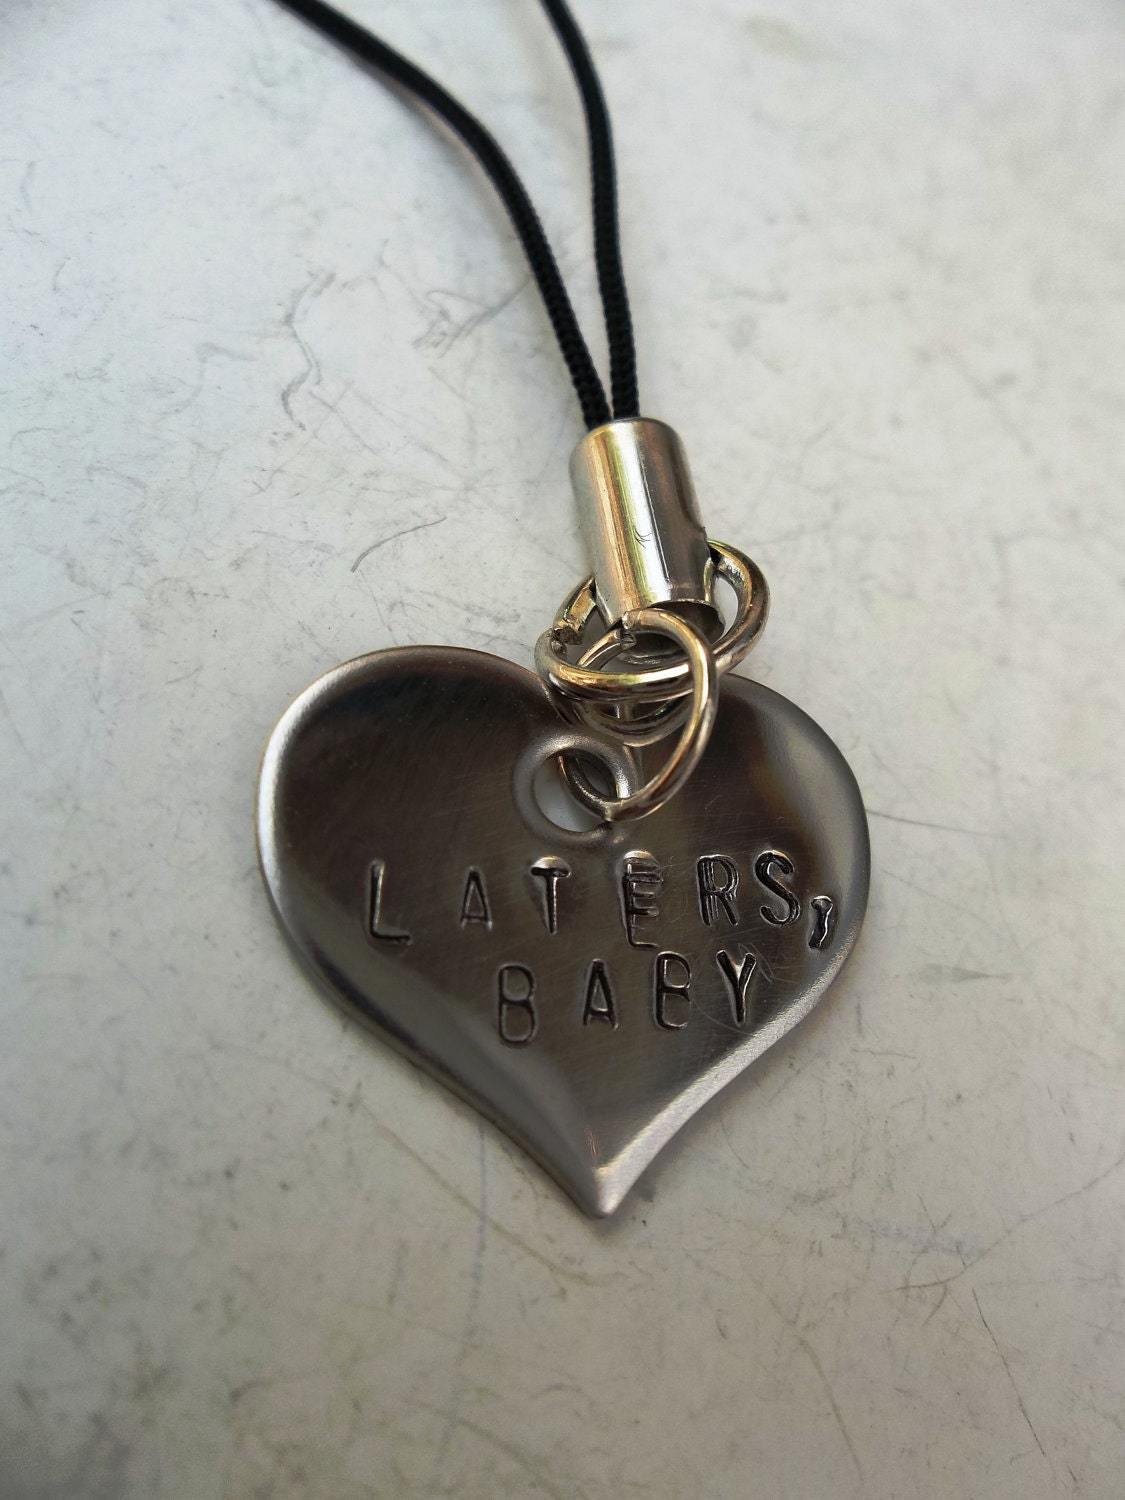 Fifty Shades of Grey Laters Baby Phone or eReader Charm Inspired by the Book